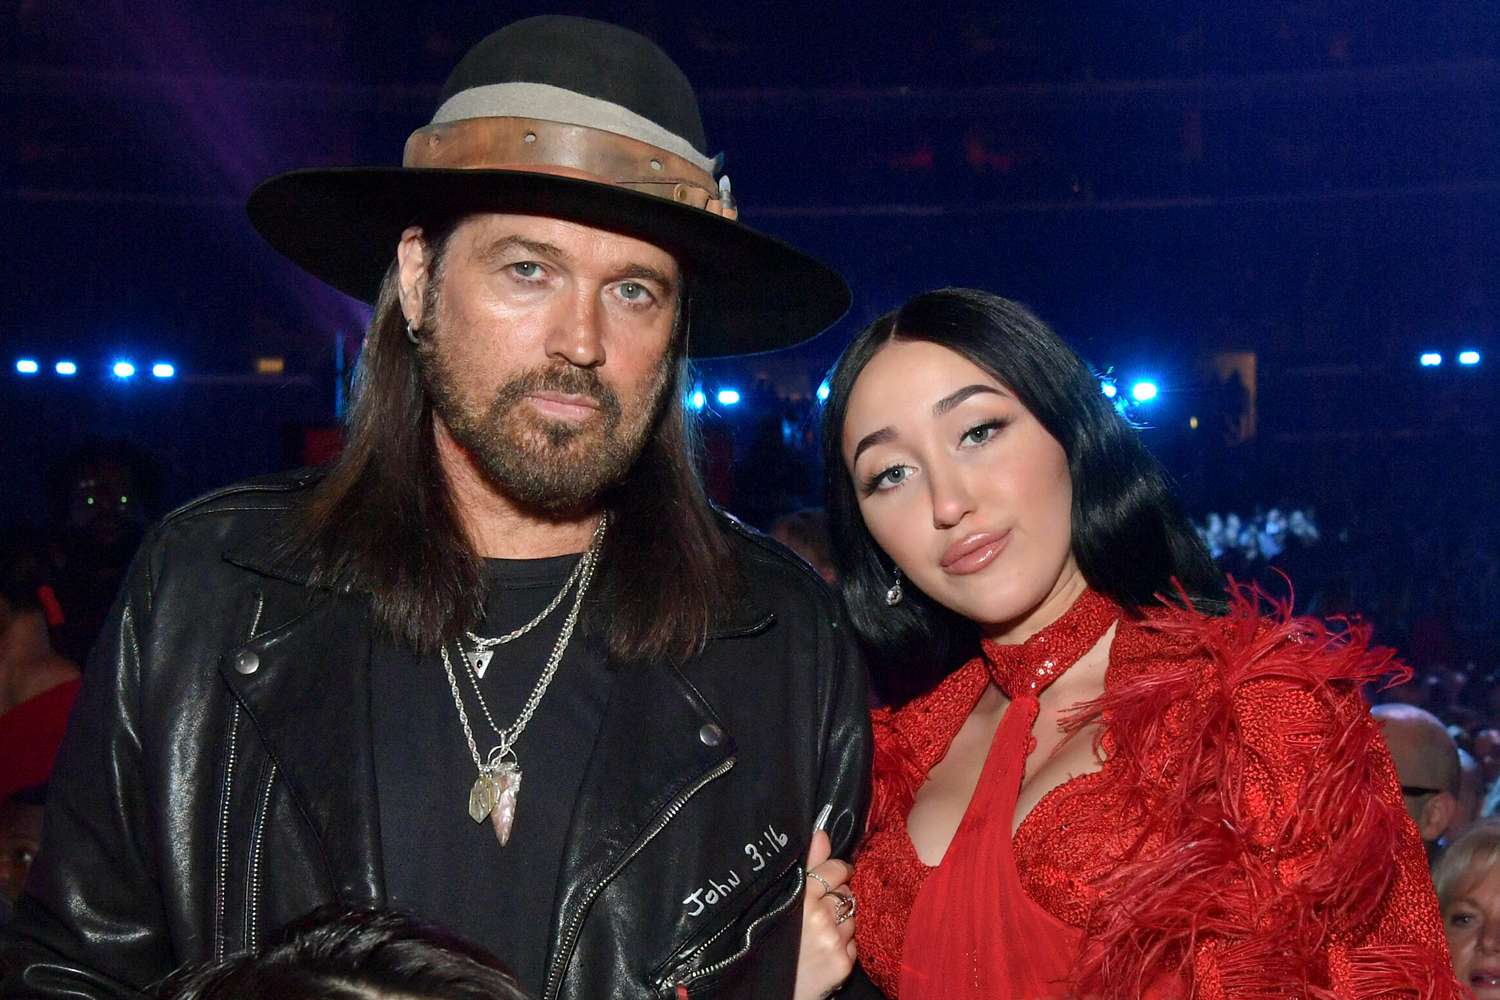 Billy Ray Cyrus and Noah Cyrus during the 62nd Annual GRAMMY Awards at STAPLES Center on January 26, 2020